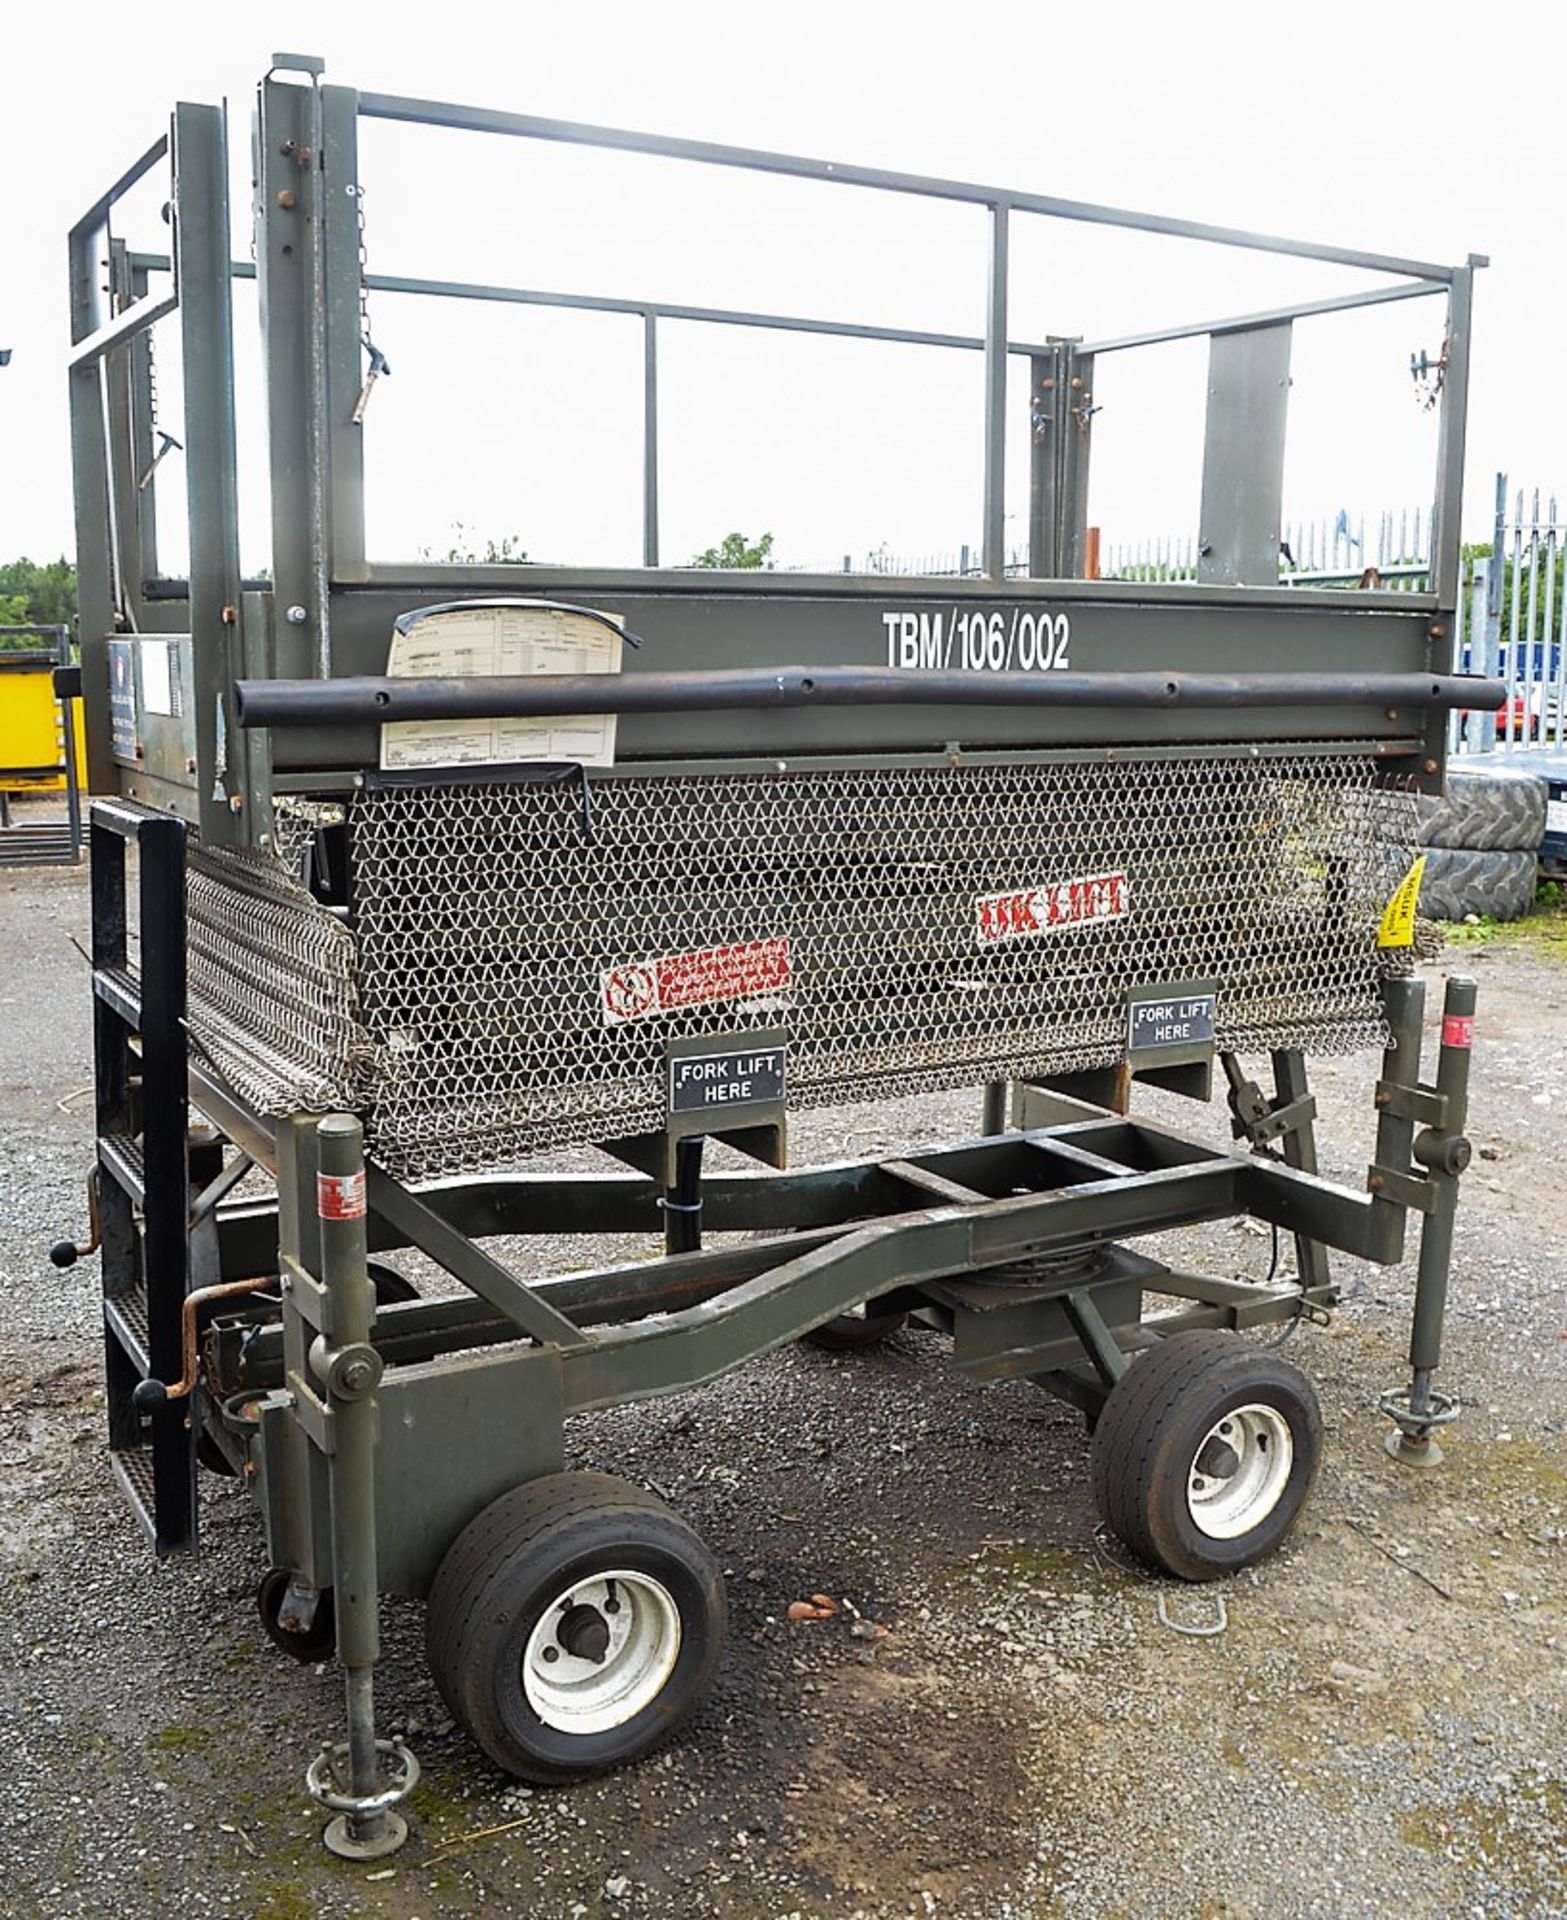 UK Lift manual hydraulic site tow mobile access platform (Ex MOD) - Image 5 of 5